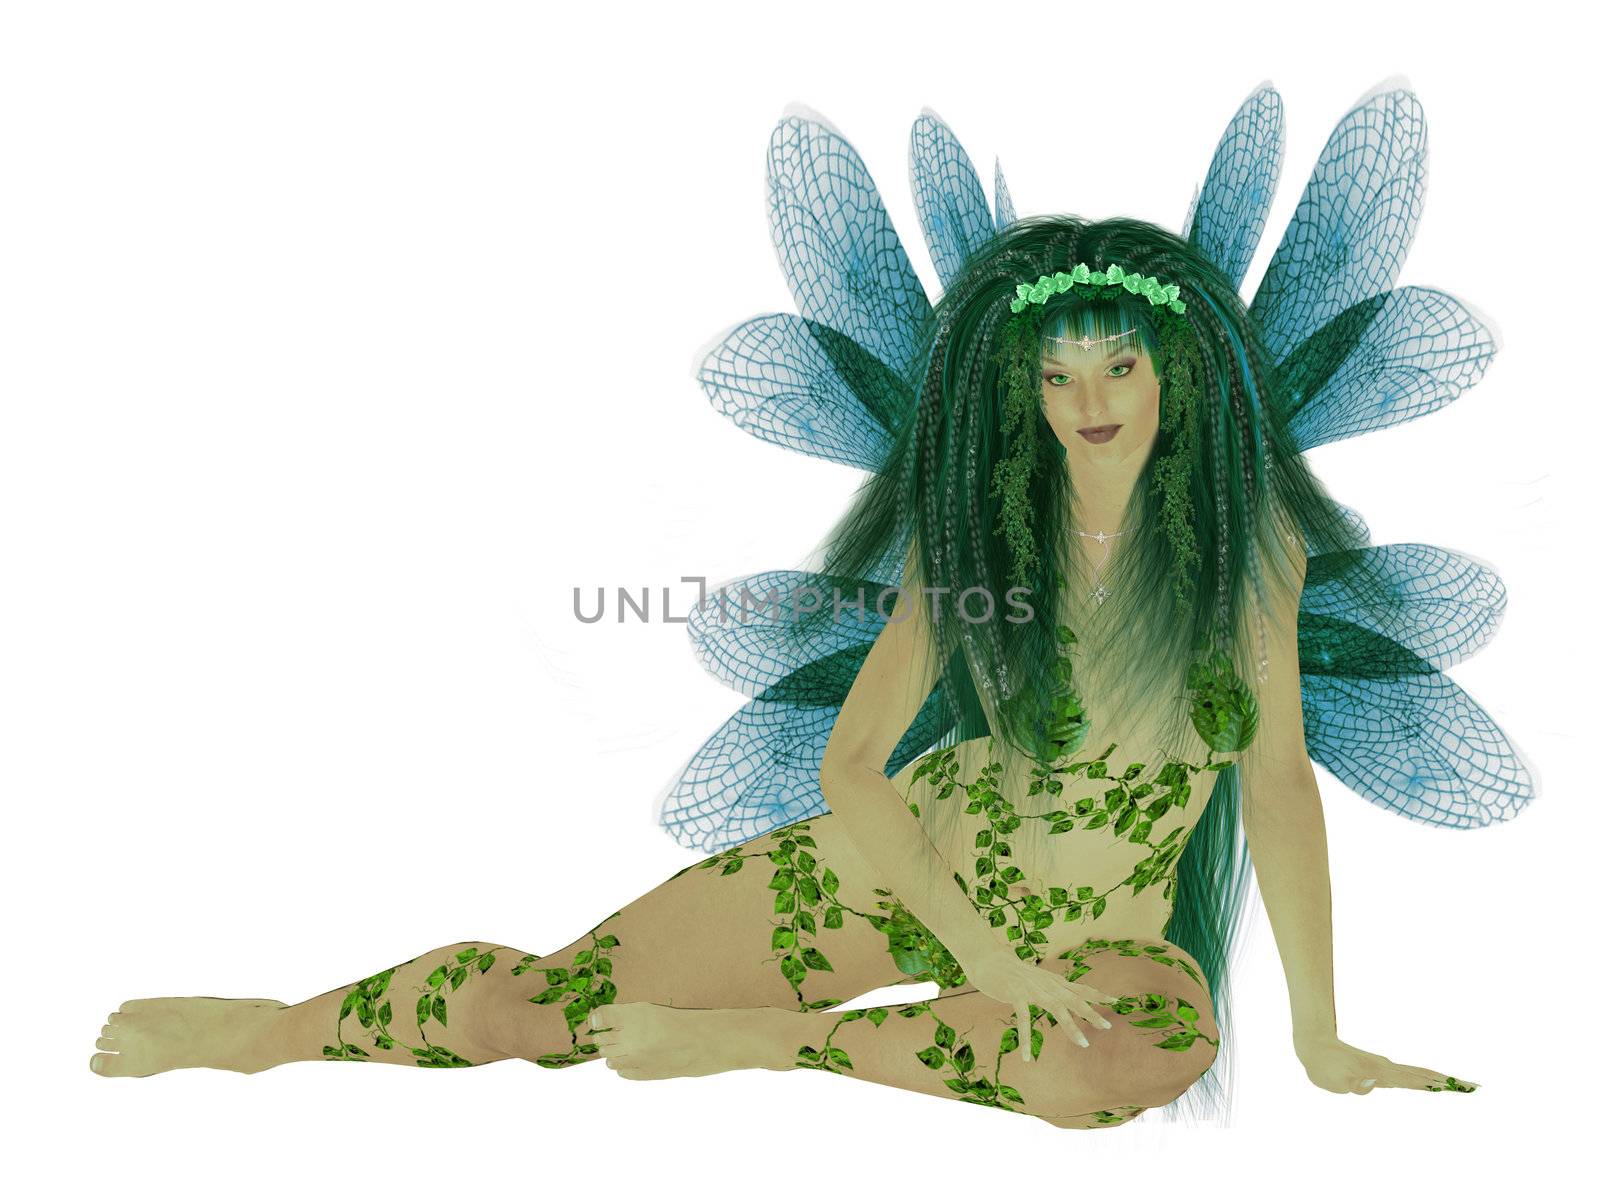 Translucent Blue Green Fairy by kathygold